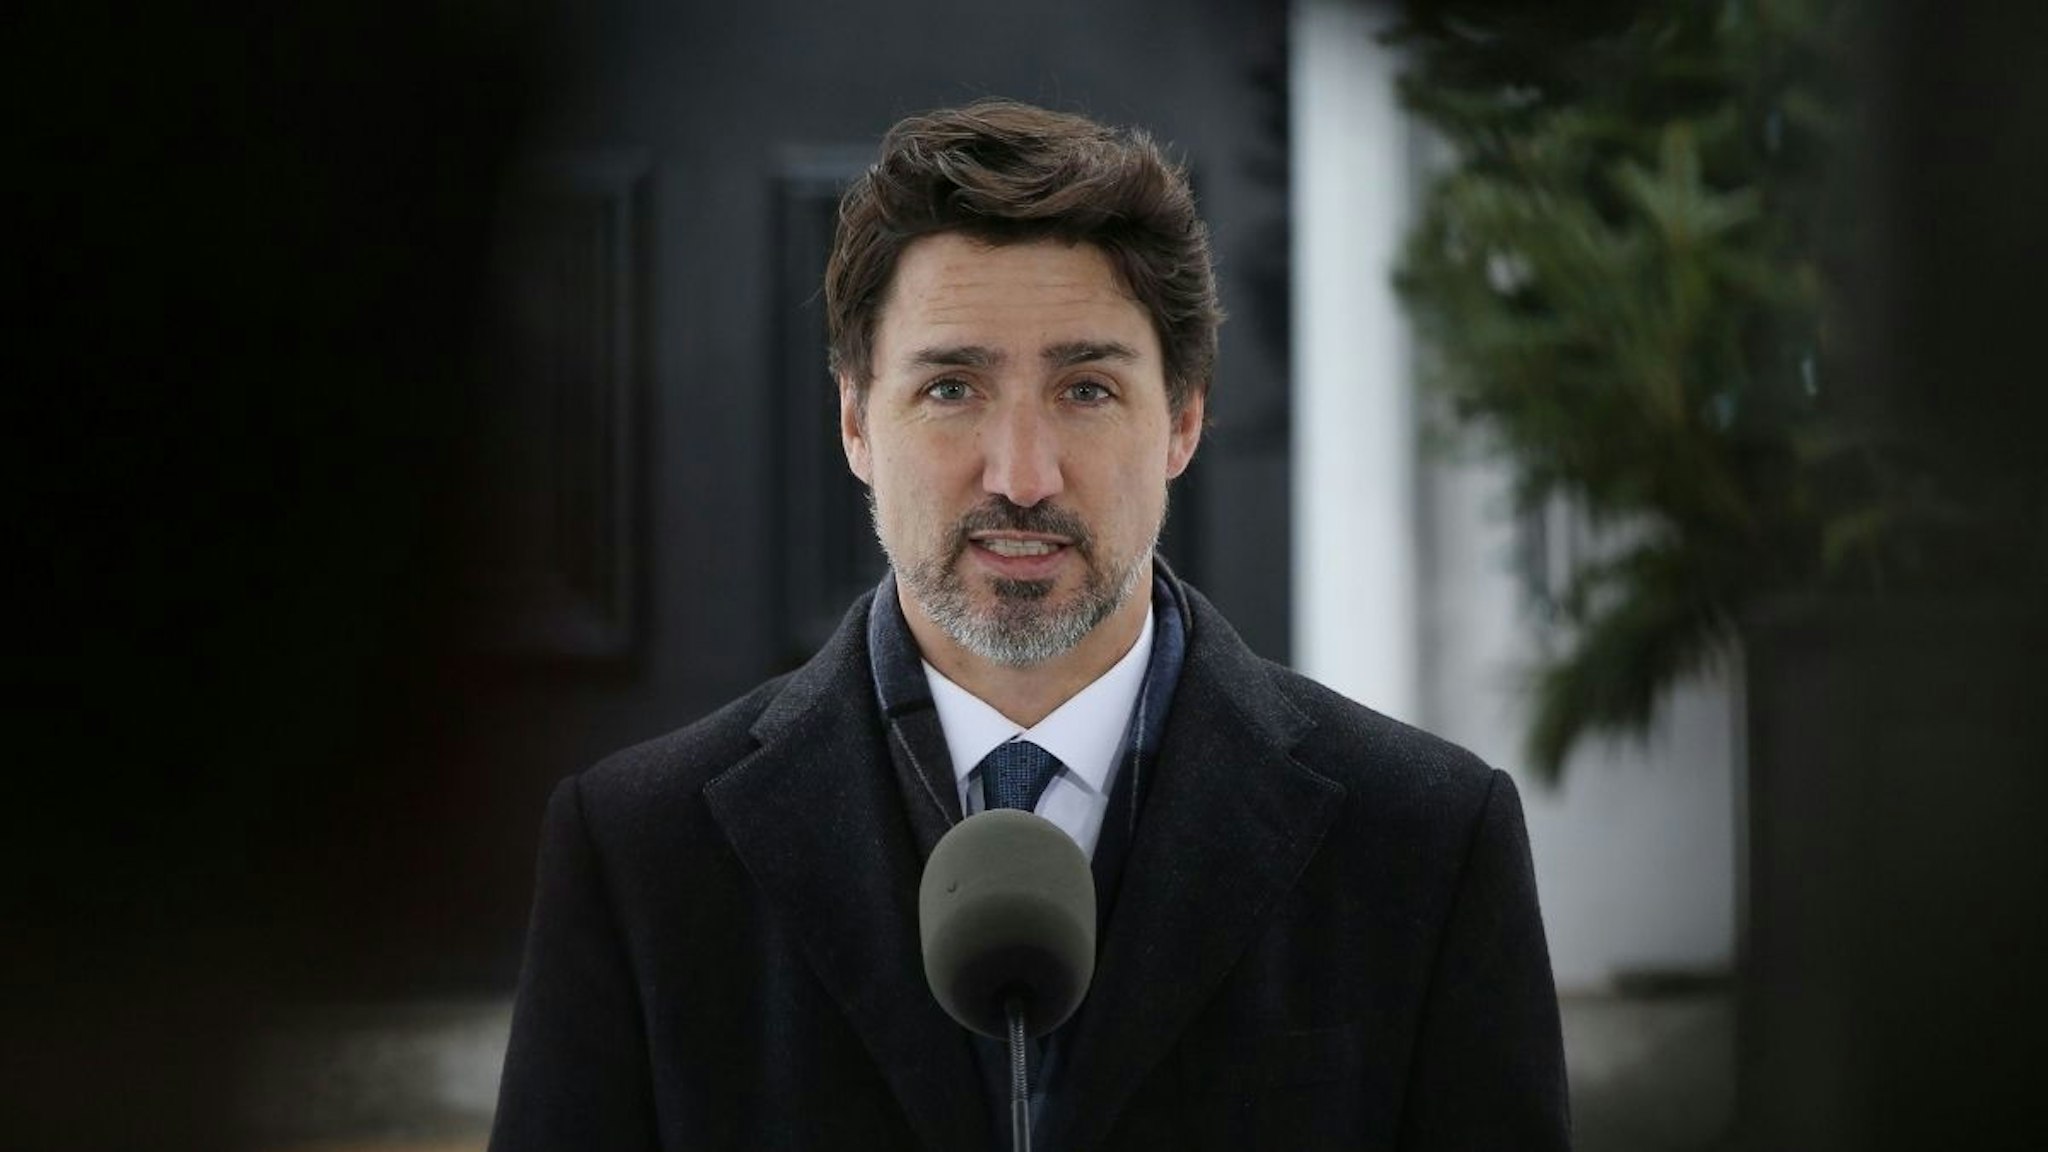 Canadian Prime Minister Justin Trudeau speaks during a news conference on COVID-19 situation in Canada from his residence March 17, 2020 in Ottawa, Canada.